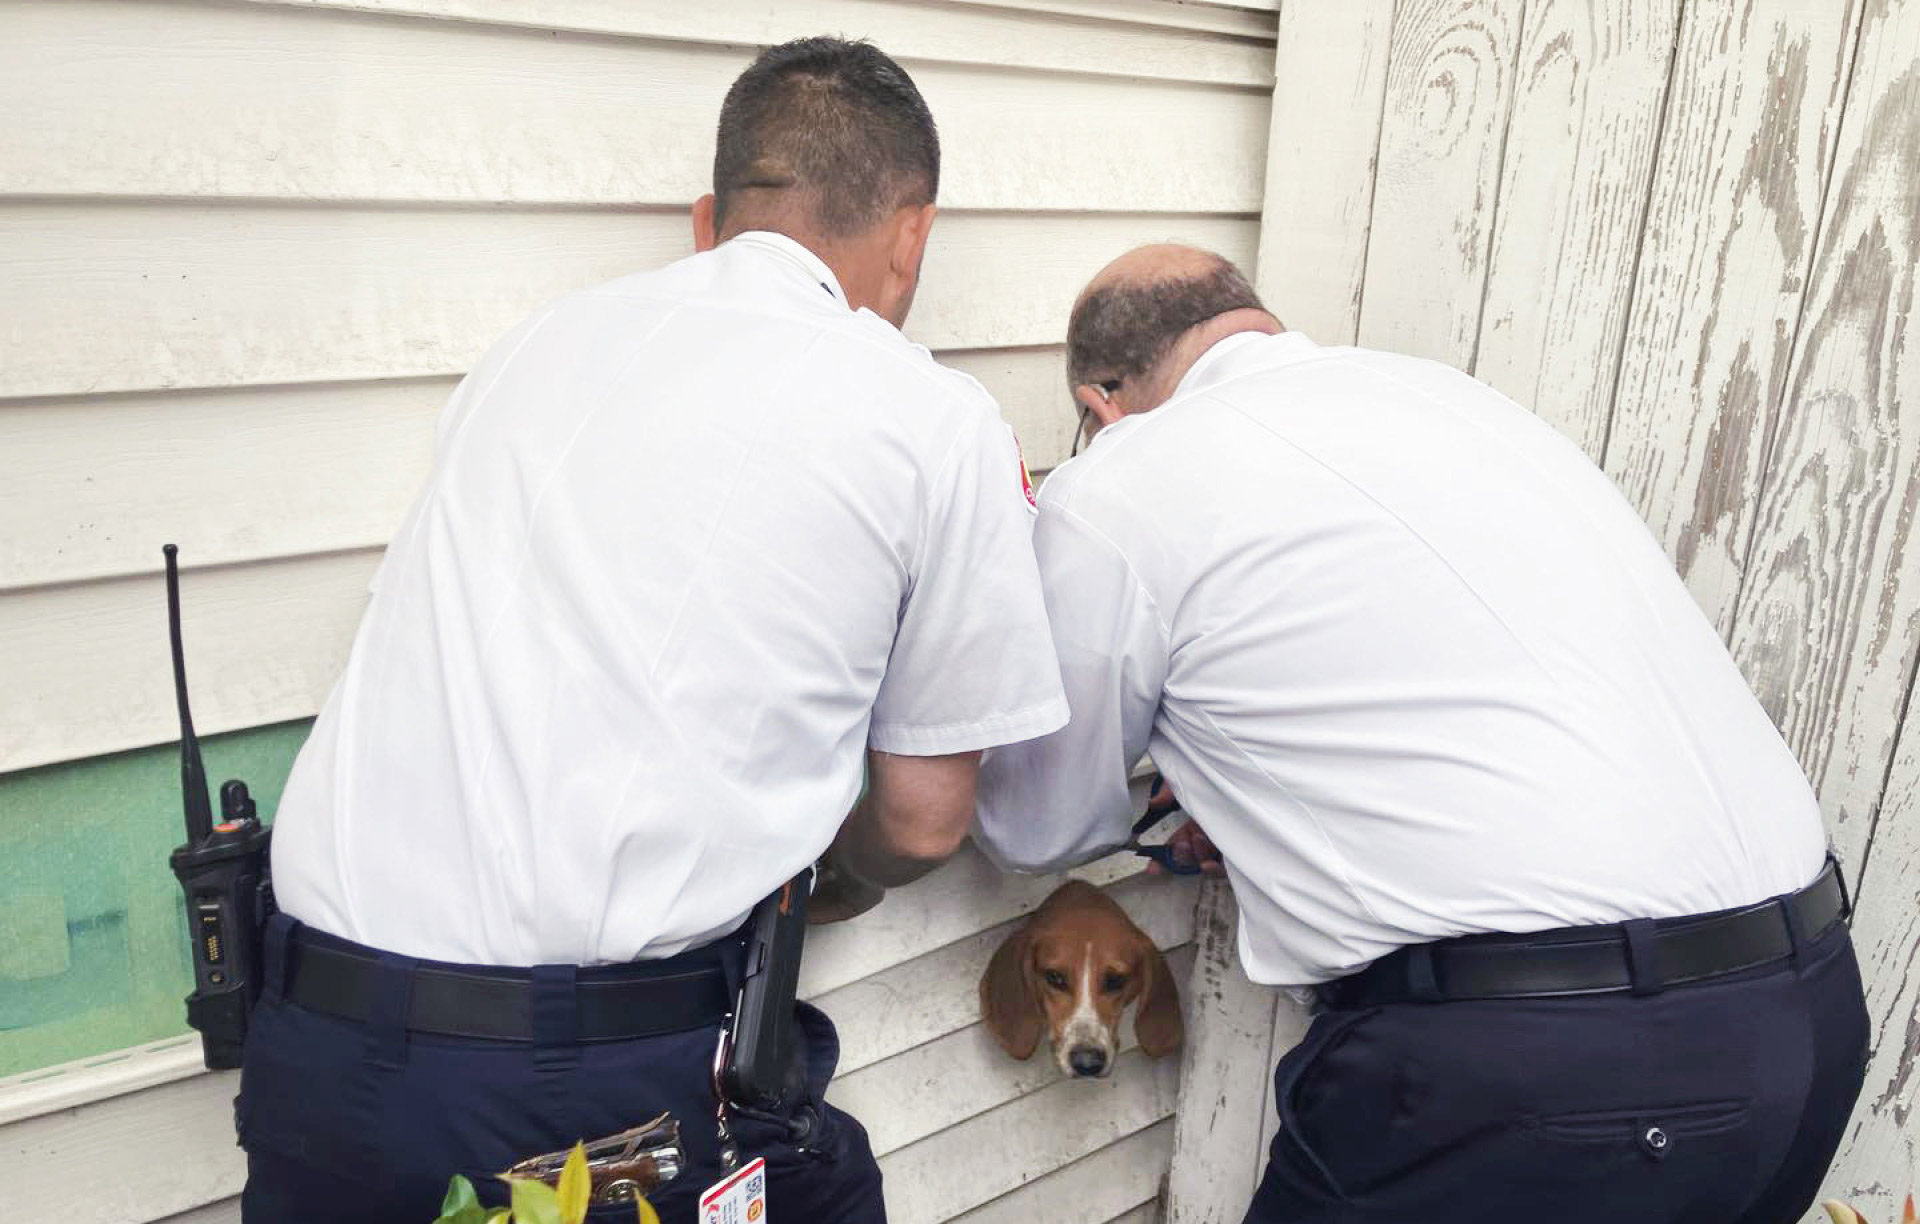 south-carolina-police-rescue-mischievous-pup-after-he-got-stuck-in-dryer-vent-3